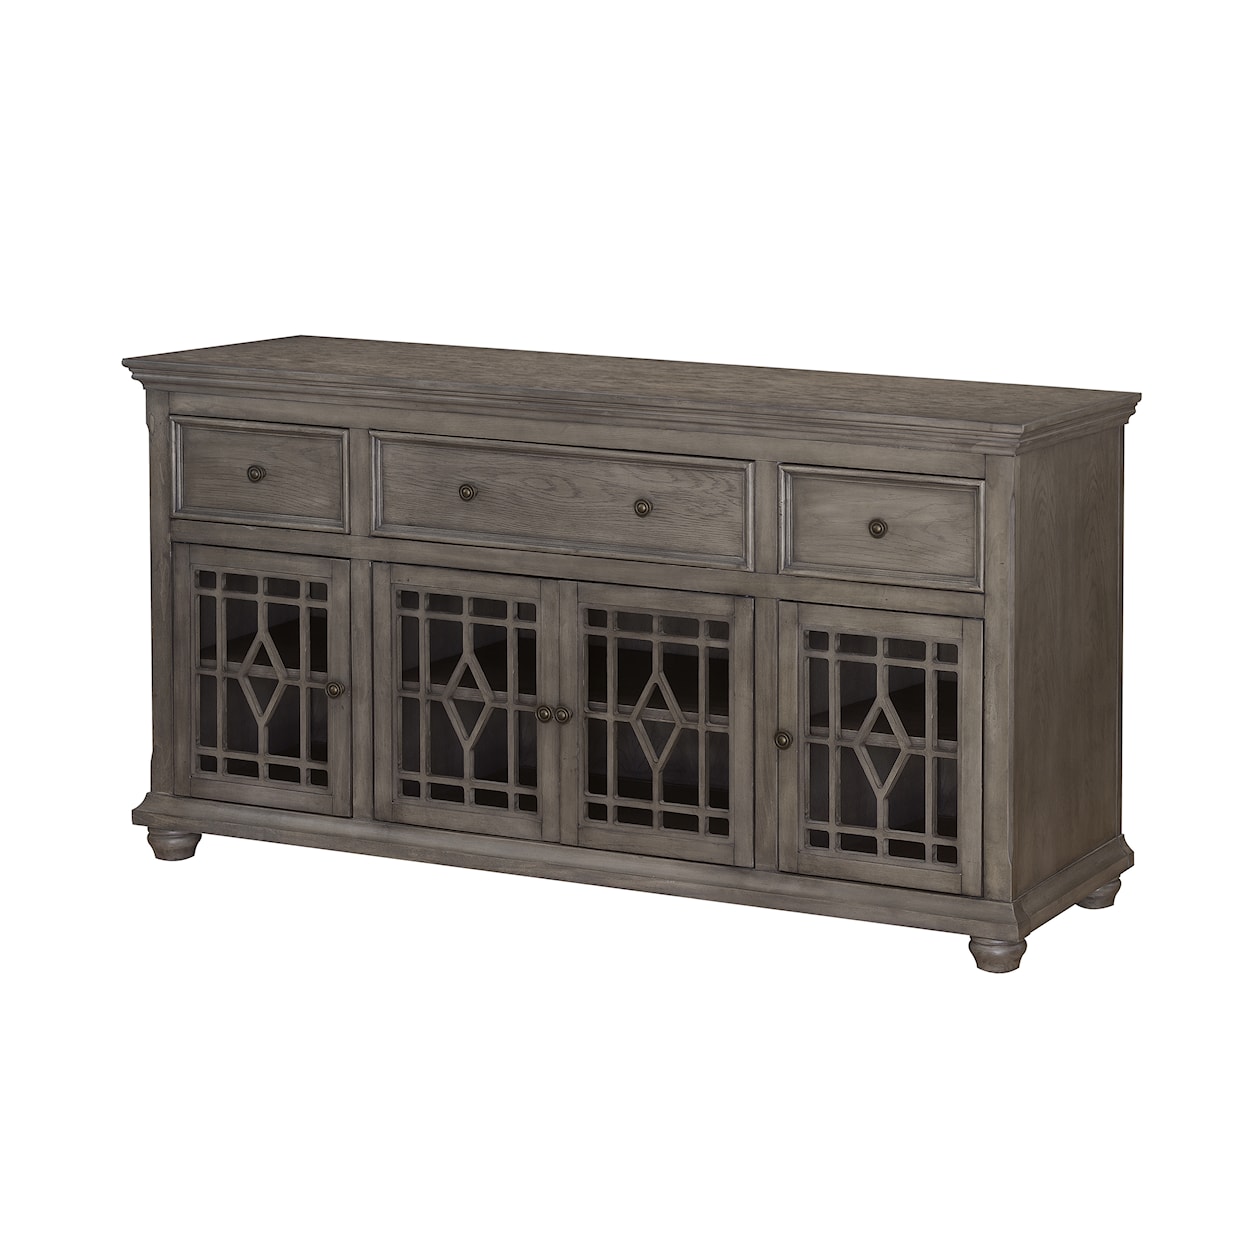 Accentrics Home Accents Four Door Cabinet in Ash Grey